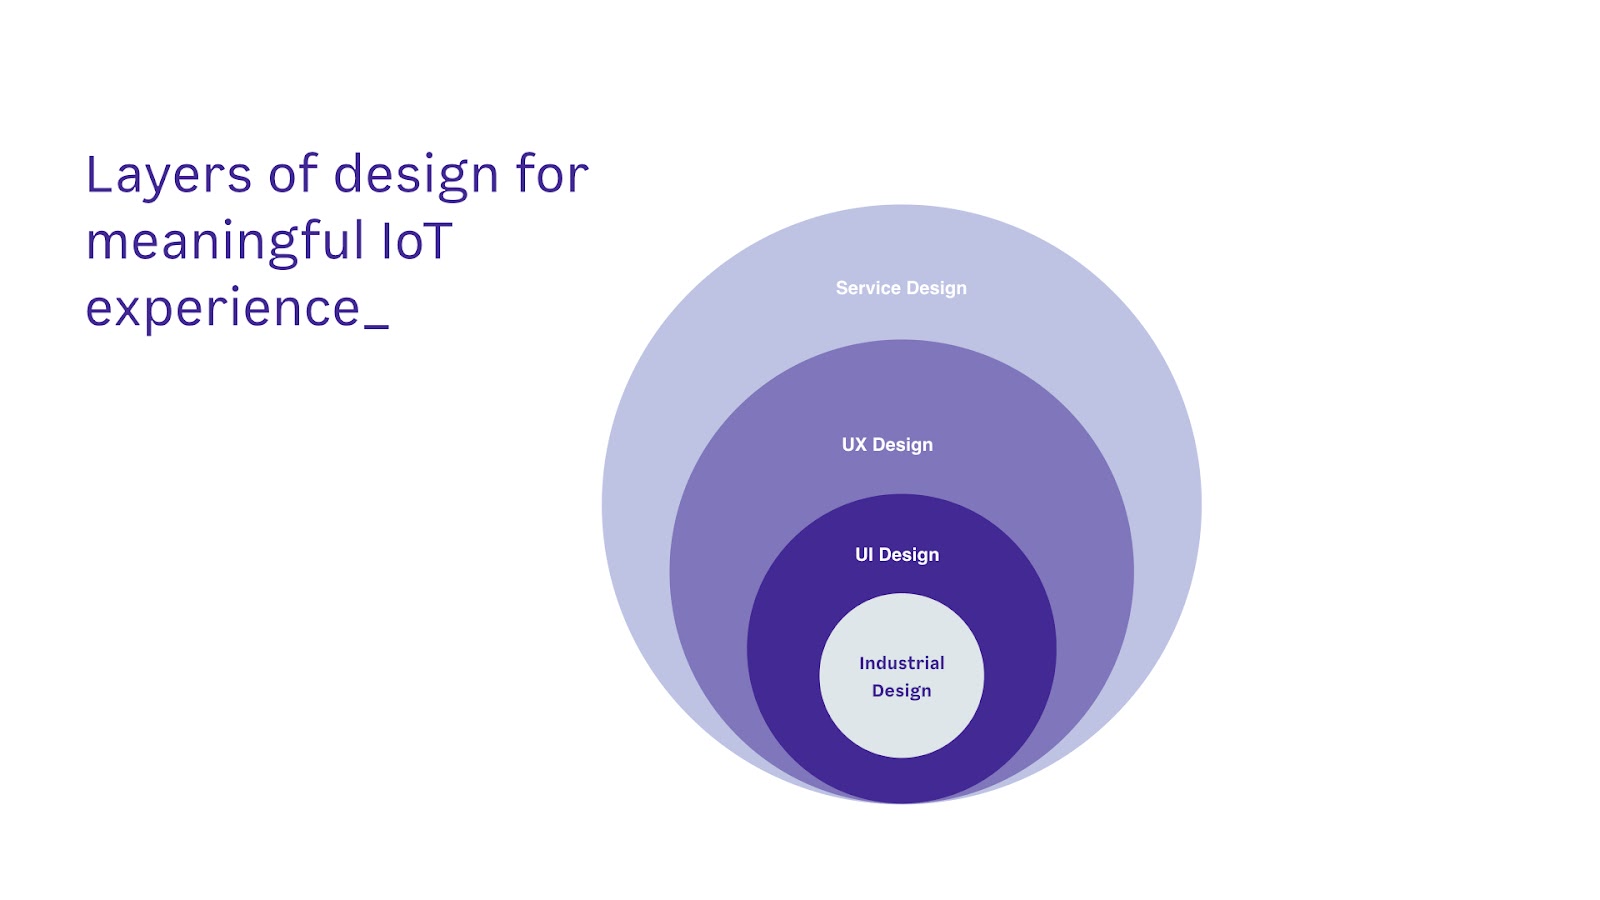 Layers of design for meaningful IOT expeirence